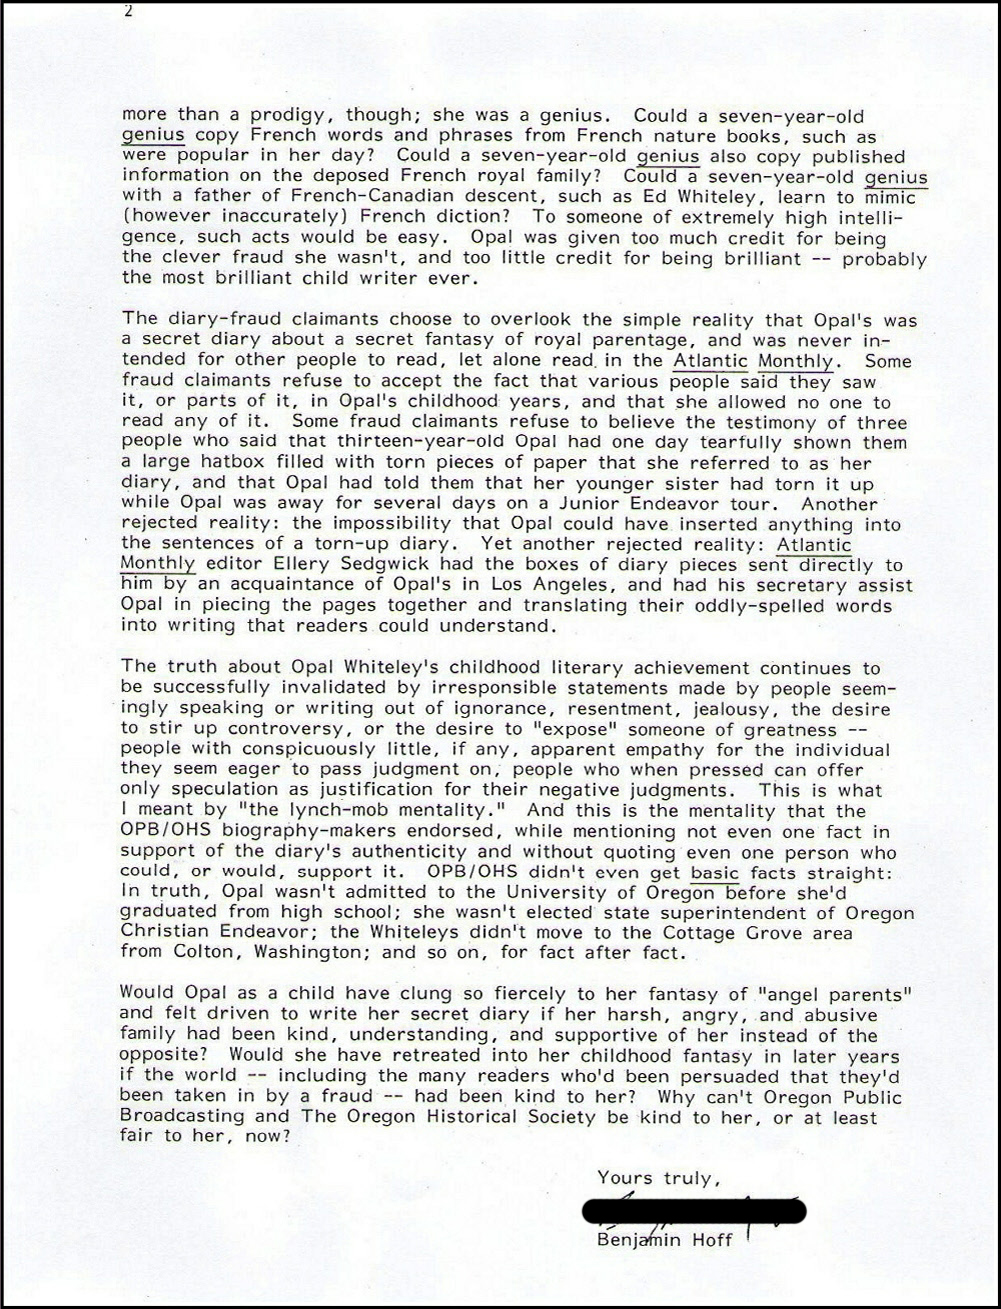 Letter from Benjamin Hoff to OPB May 2010, page 2